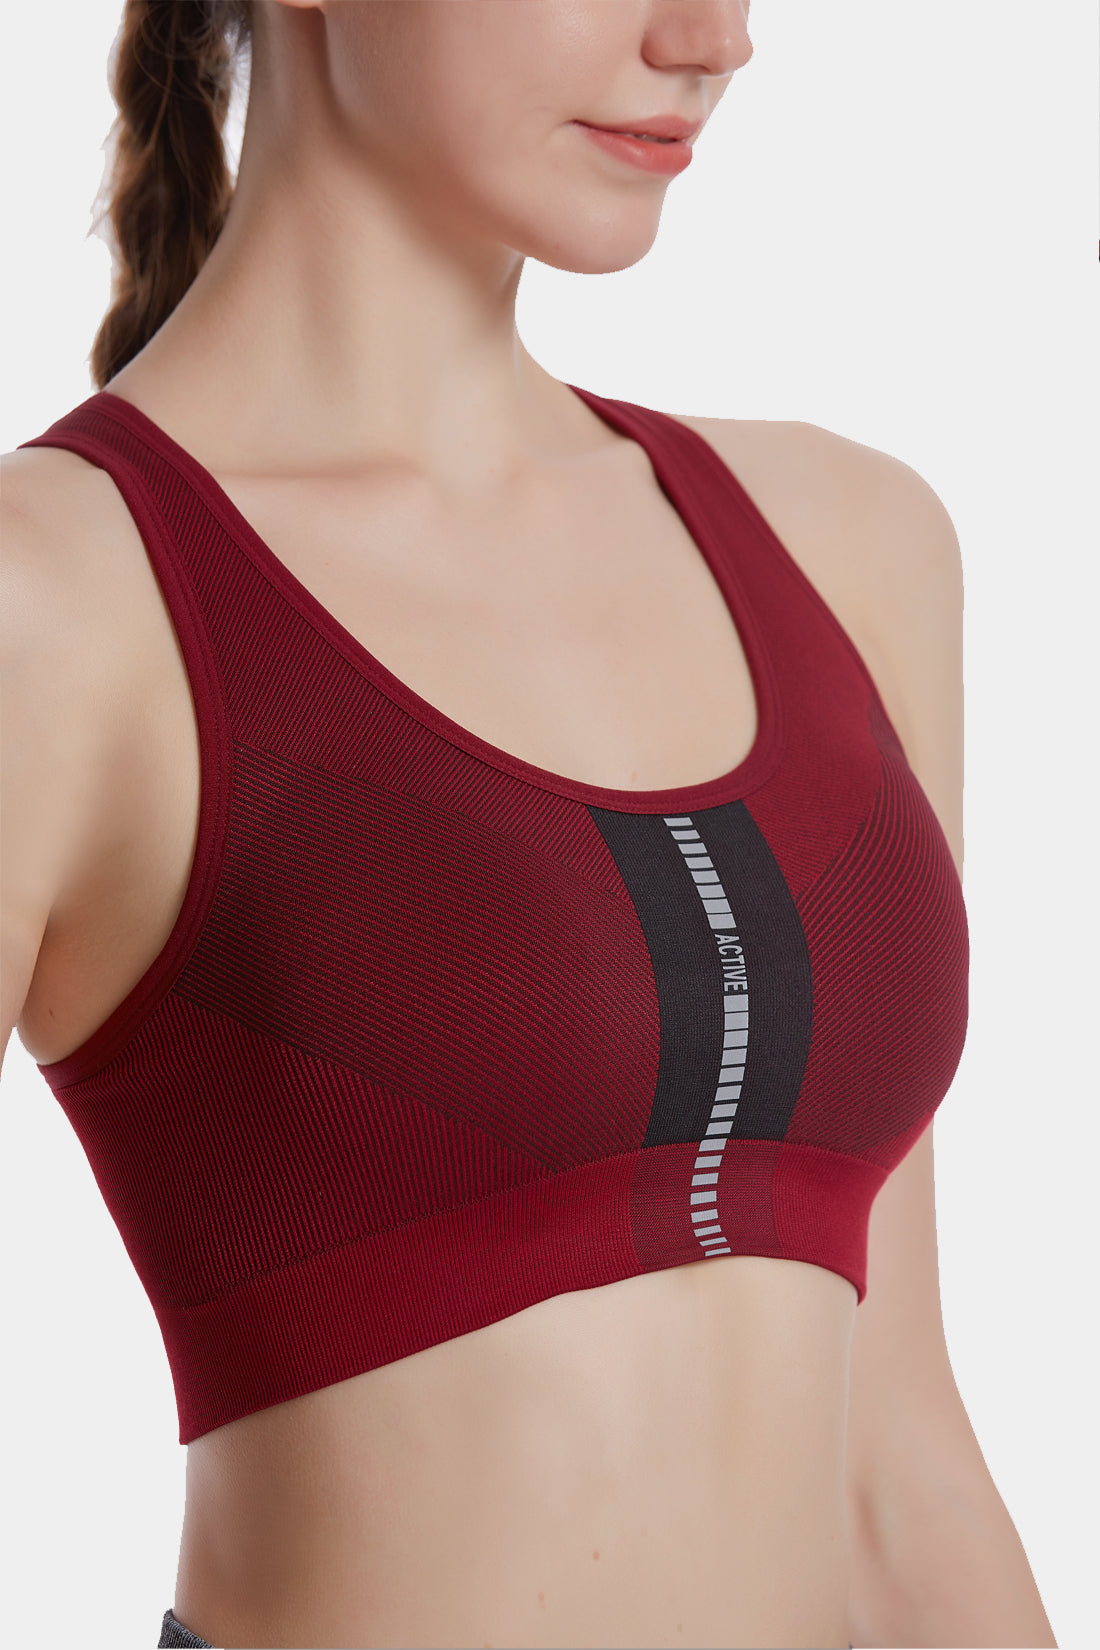 Sports Bras for Women, Padded Seamless High Impact Support for